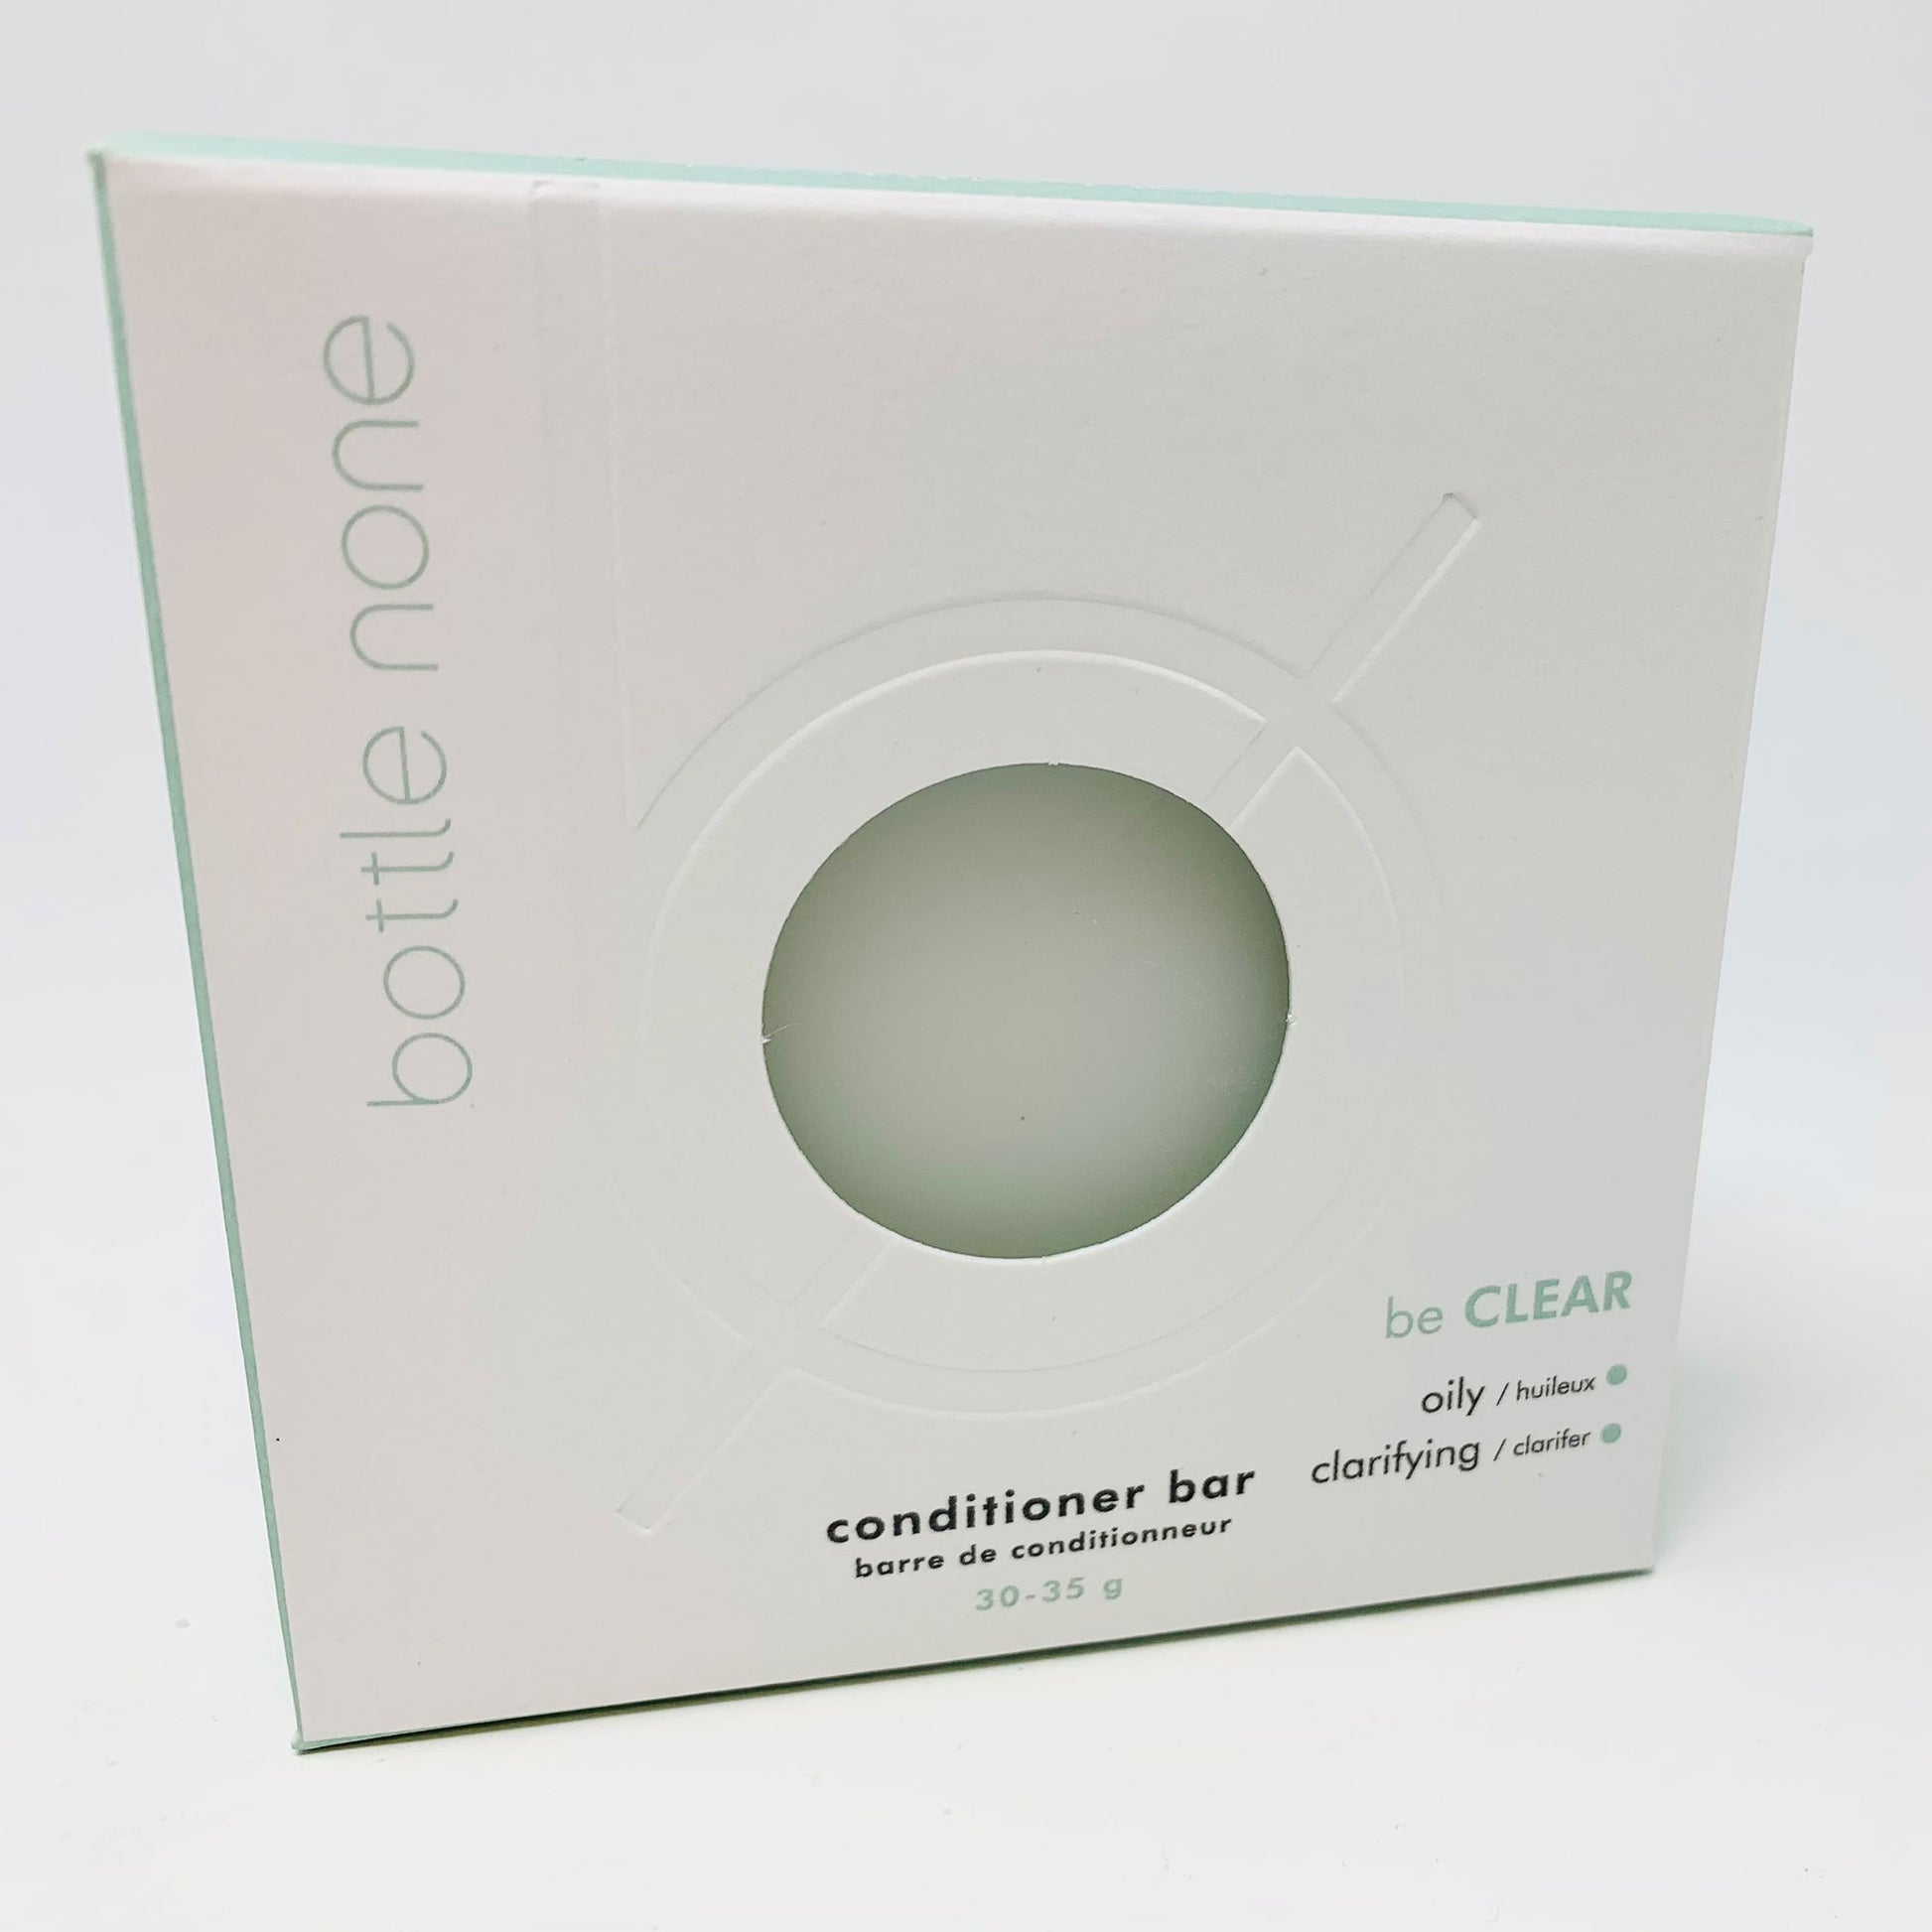 be CLEAR conditioner bar in box